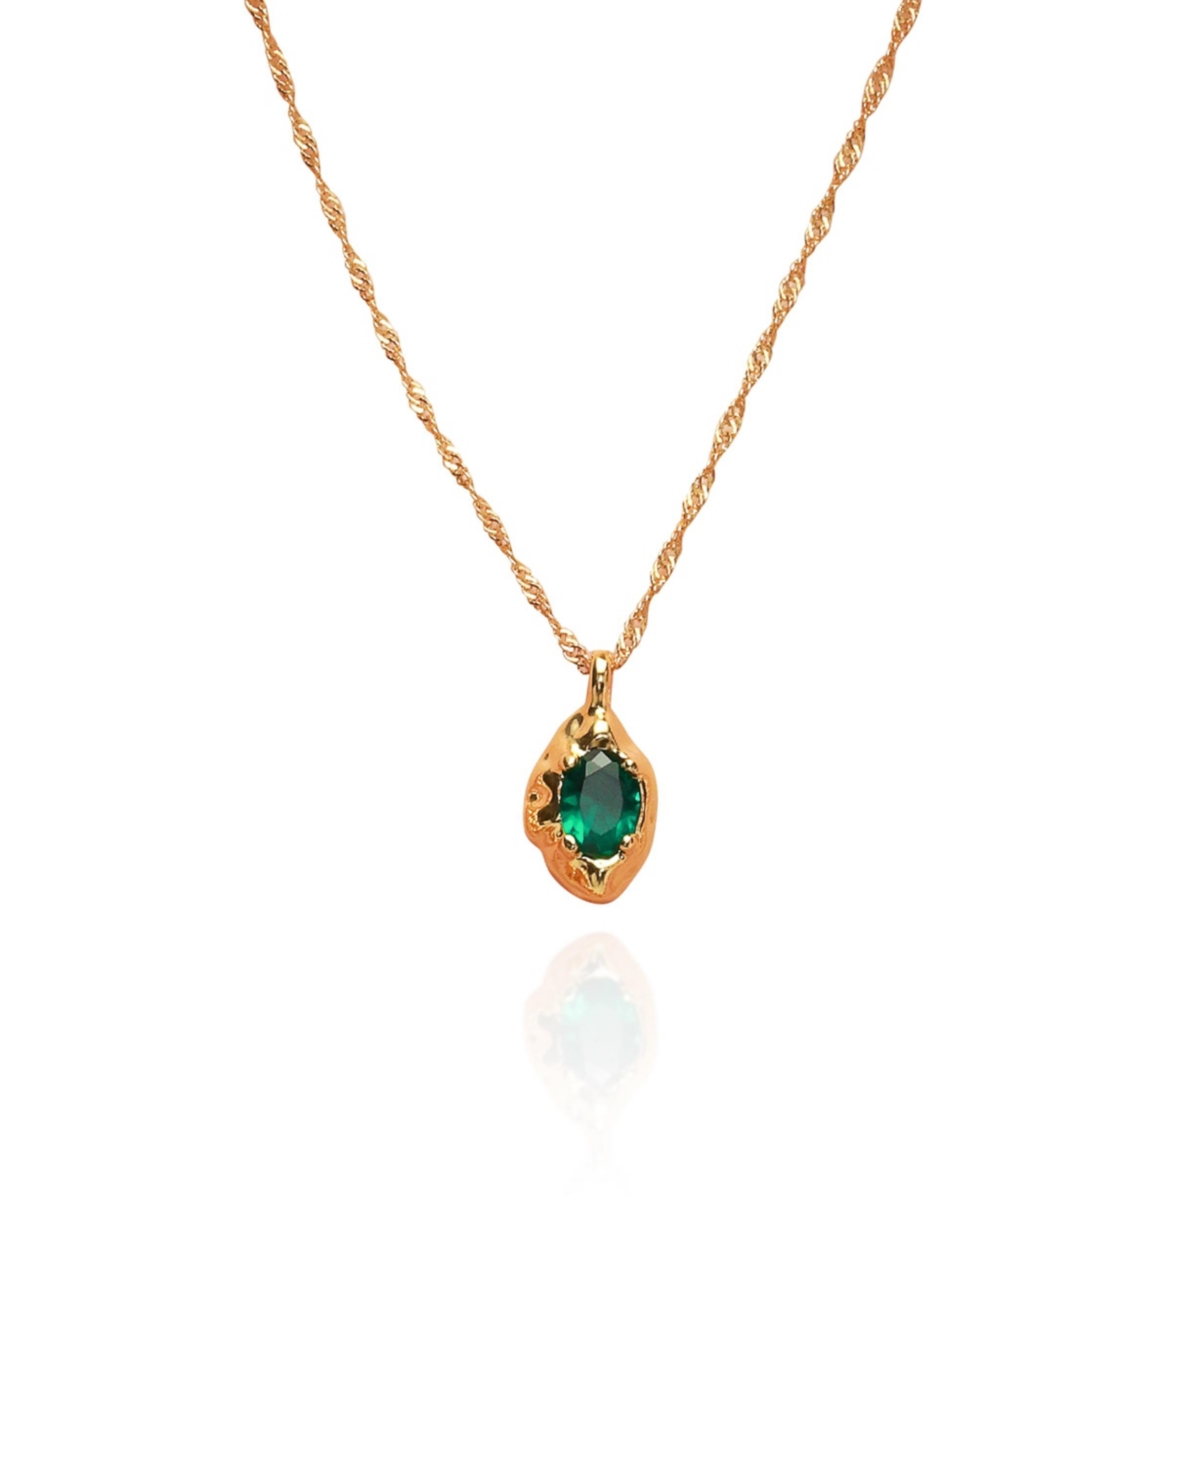 Emerald Green Pendant Necklace - Gold